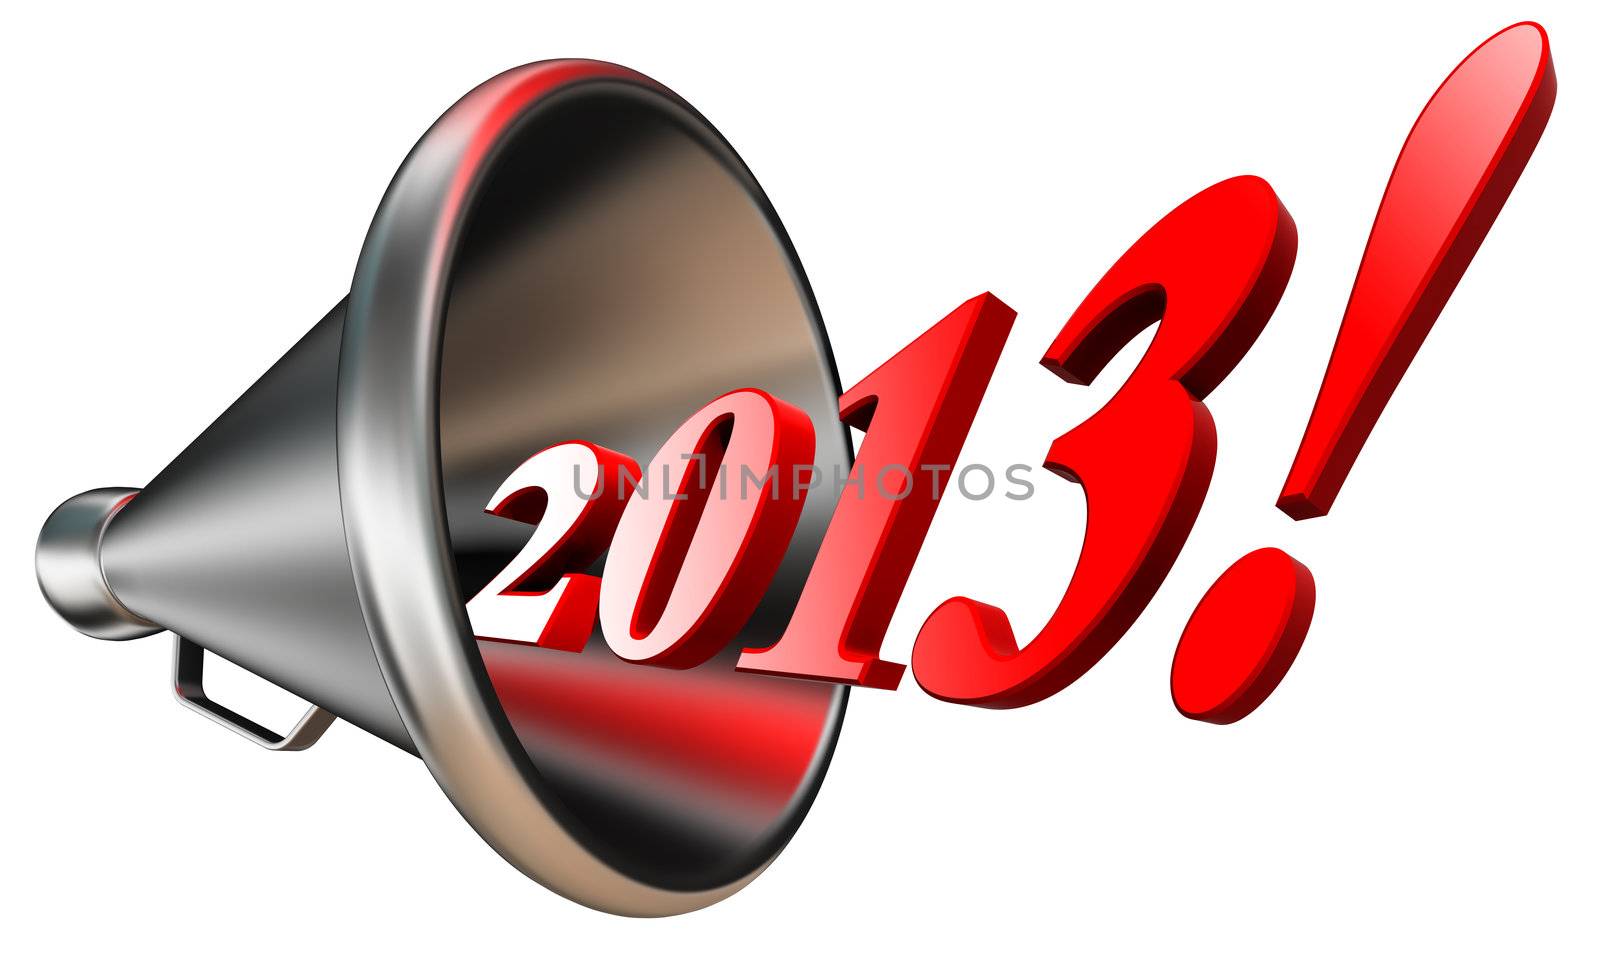 new year 2013 in megaphone isolated on white background. clipping path included